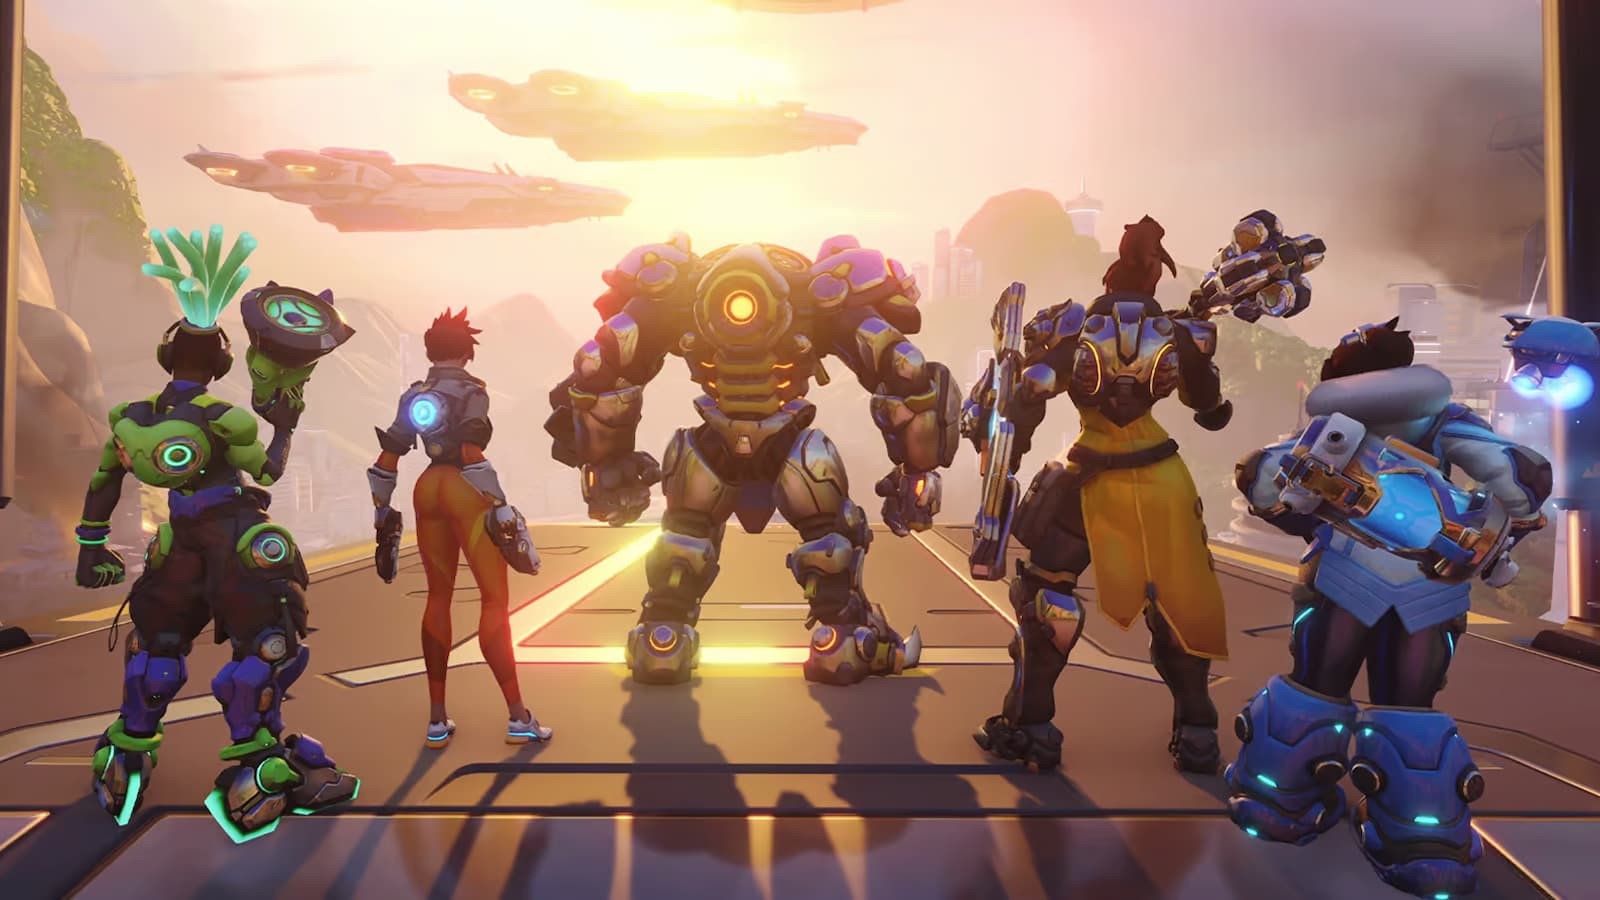 It took two years, but Blizzard is finally listening to the fans. Could Overwatch 2 see a renaissance?